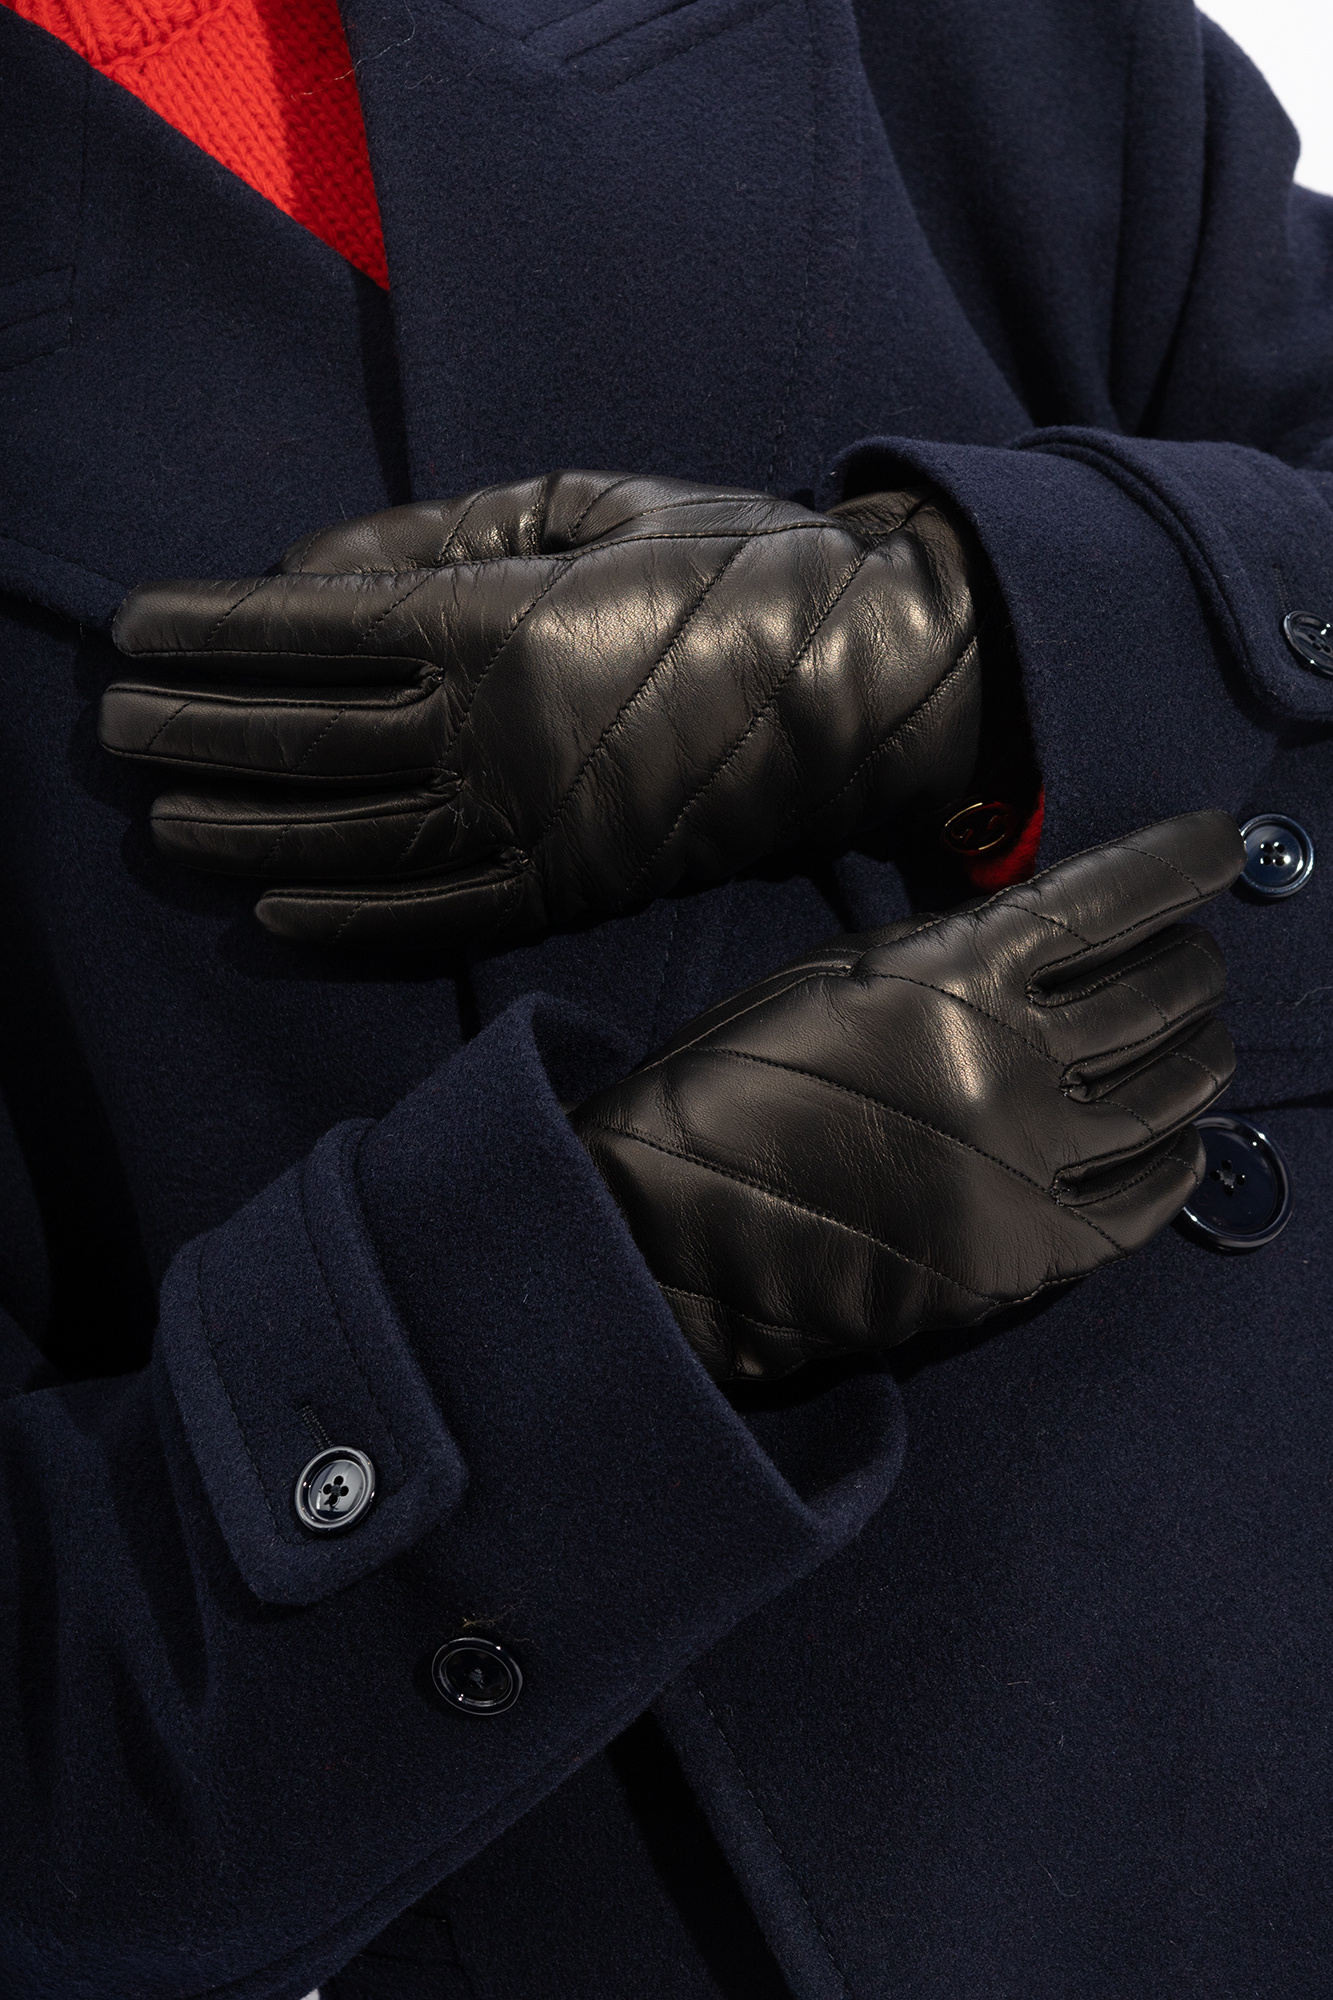 gucci LOGO Leather gloves